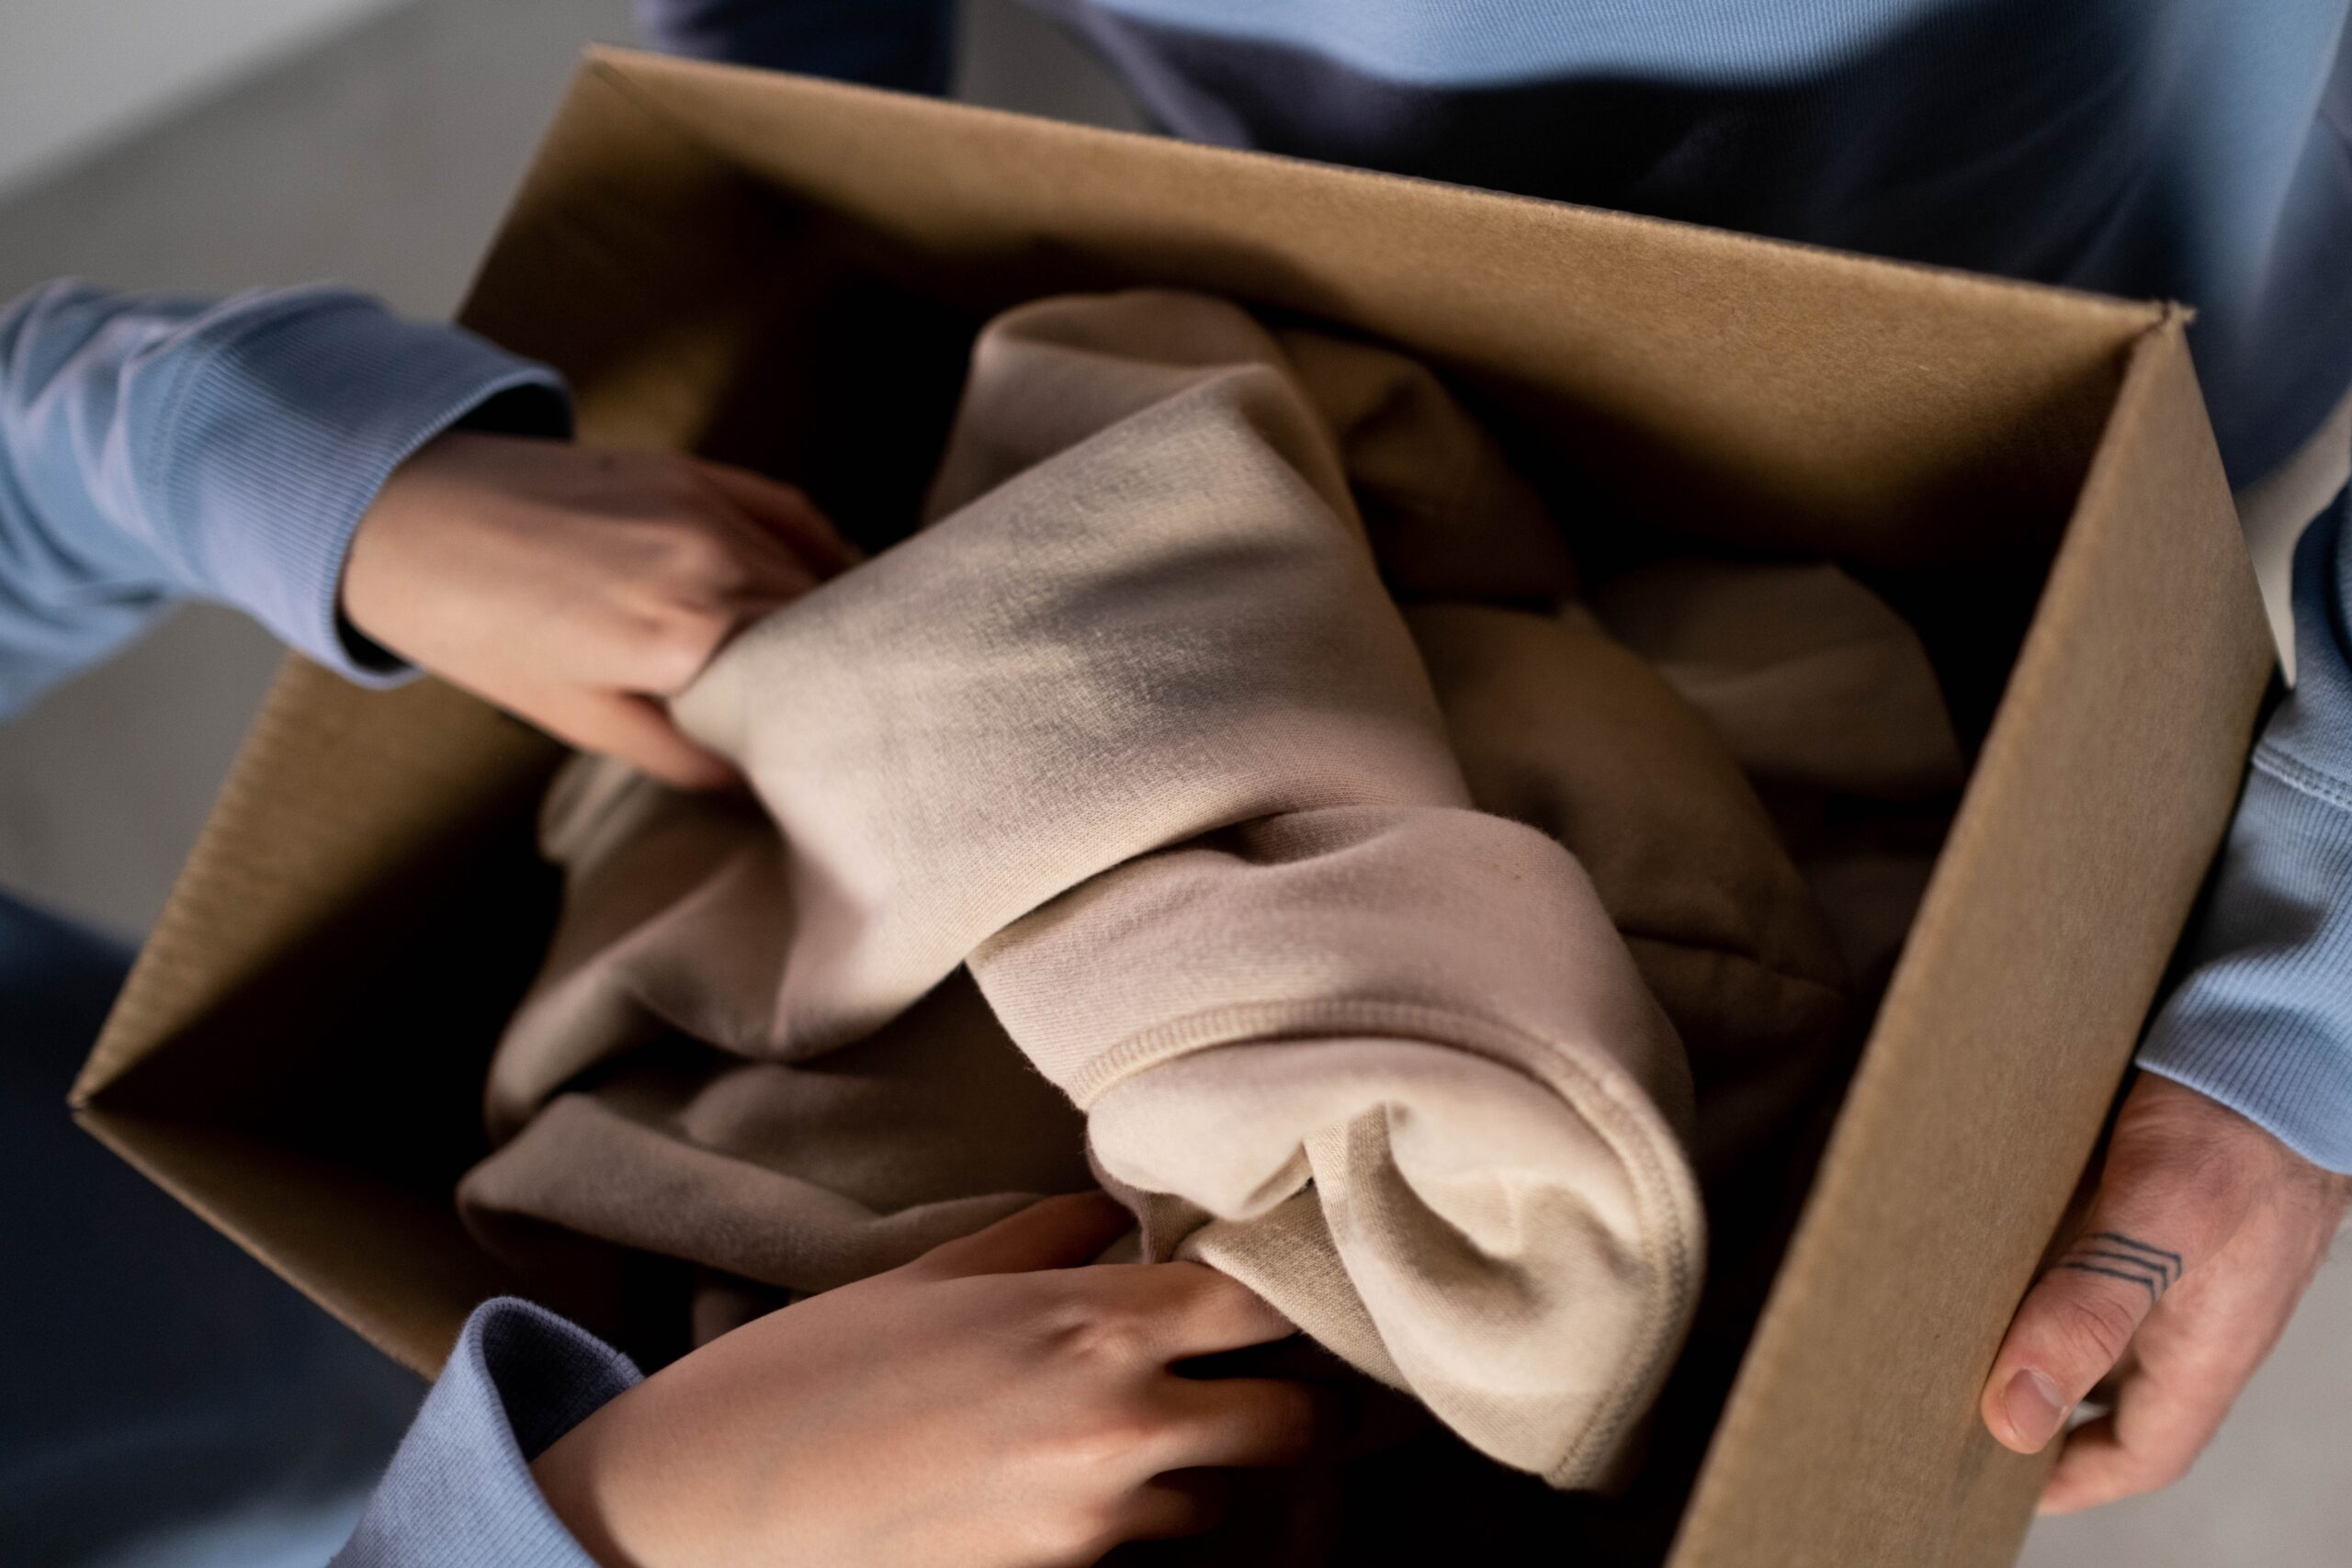 Hands placing clothes into a cardboard box.